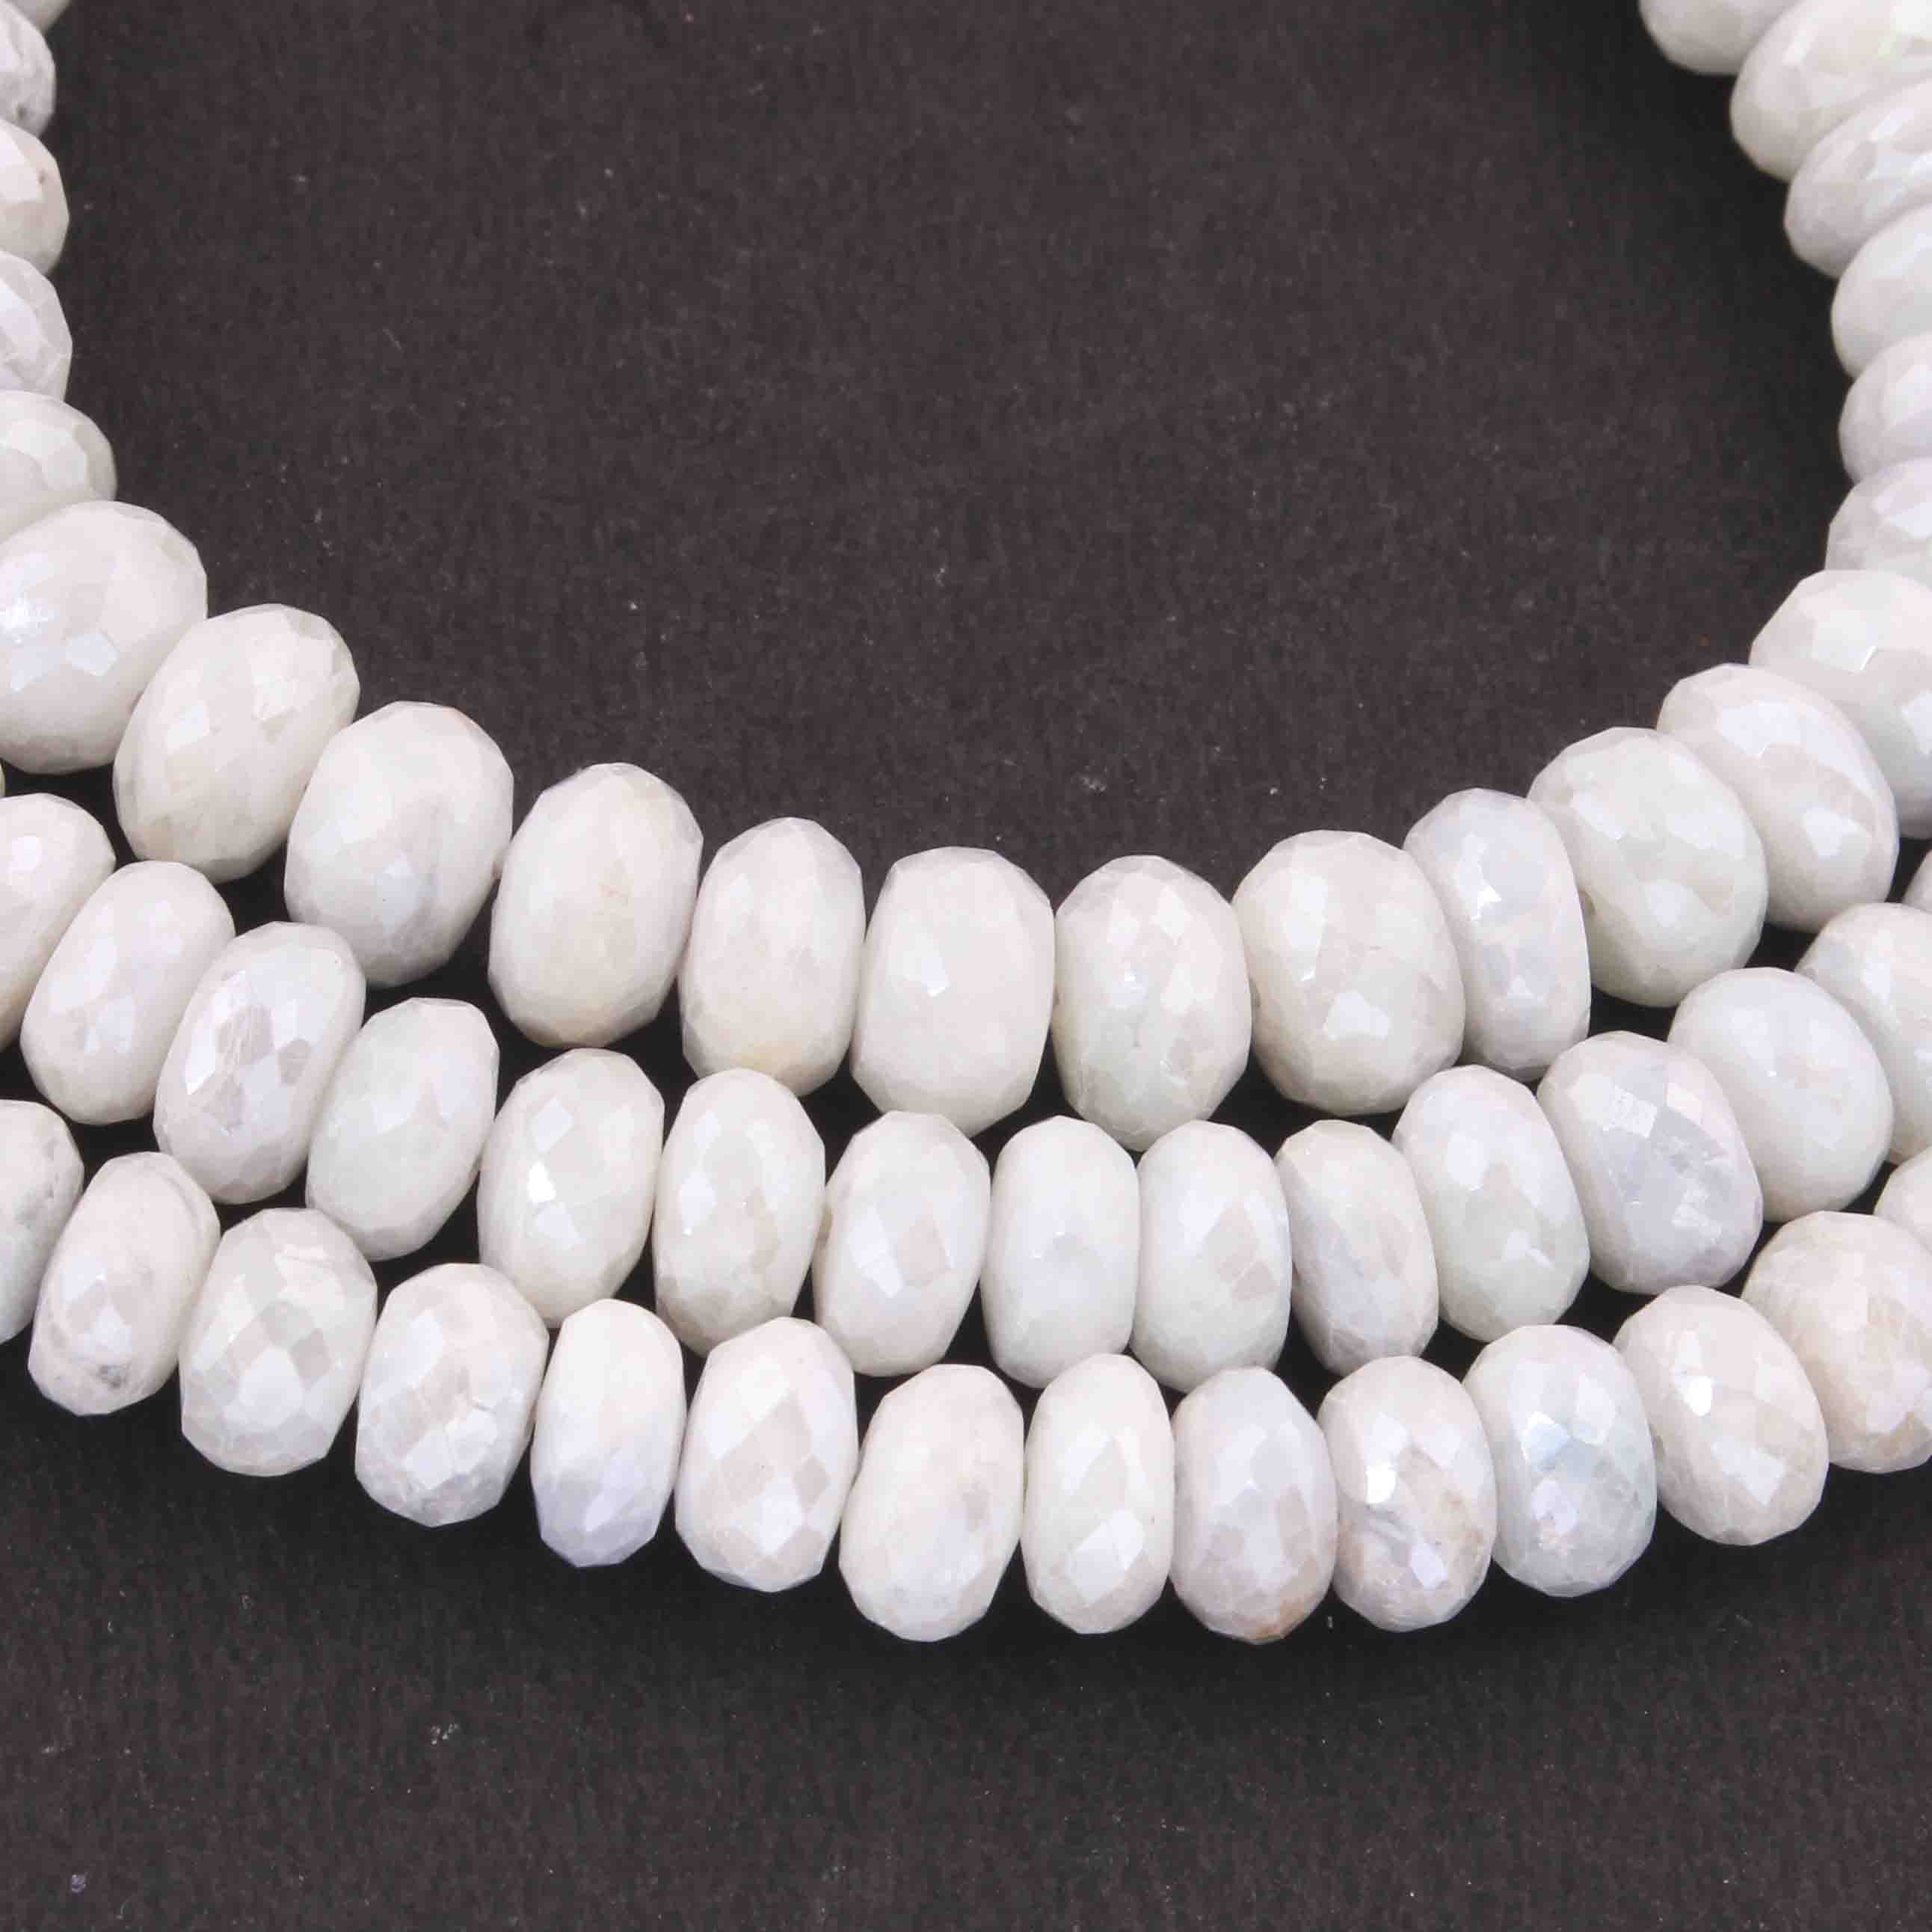  BEADIA Faceted Natural Tianhe Stone Round Loose Semi  Gemstone Beads For Jewelry Making 3-3.5mm 38cm